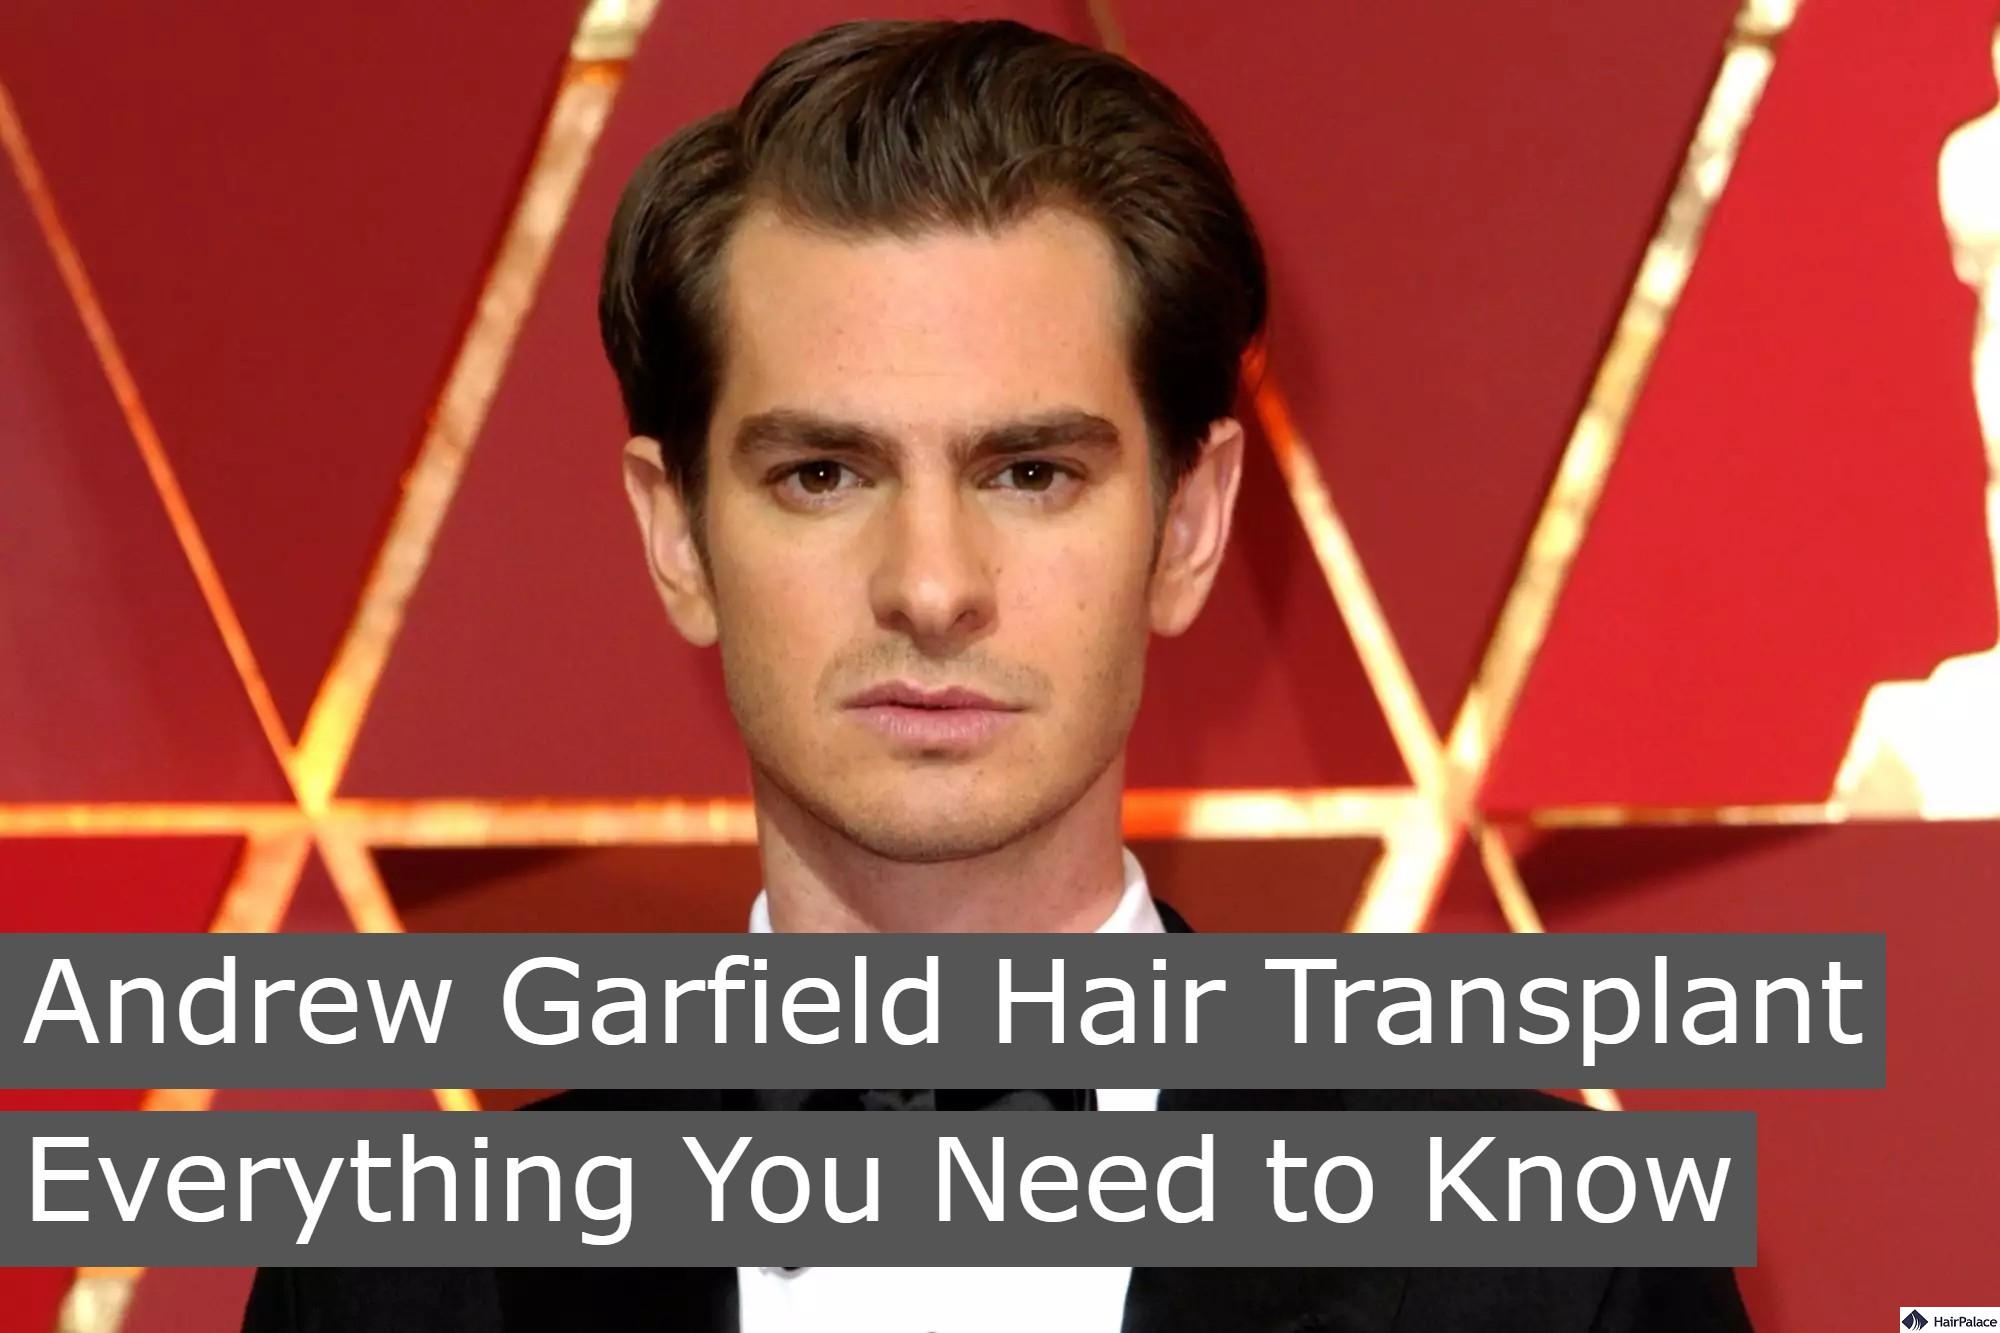 andrew garfield hair transplant everything you need to know